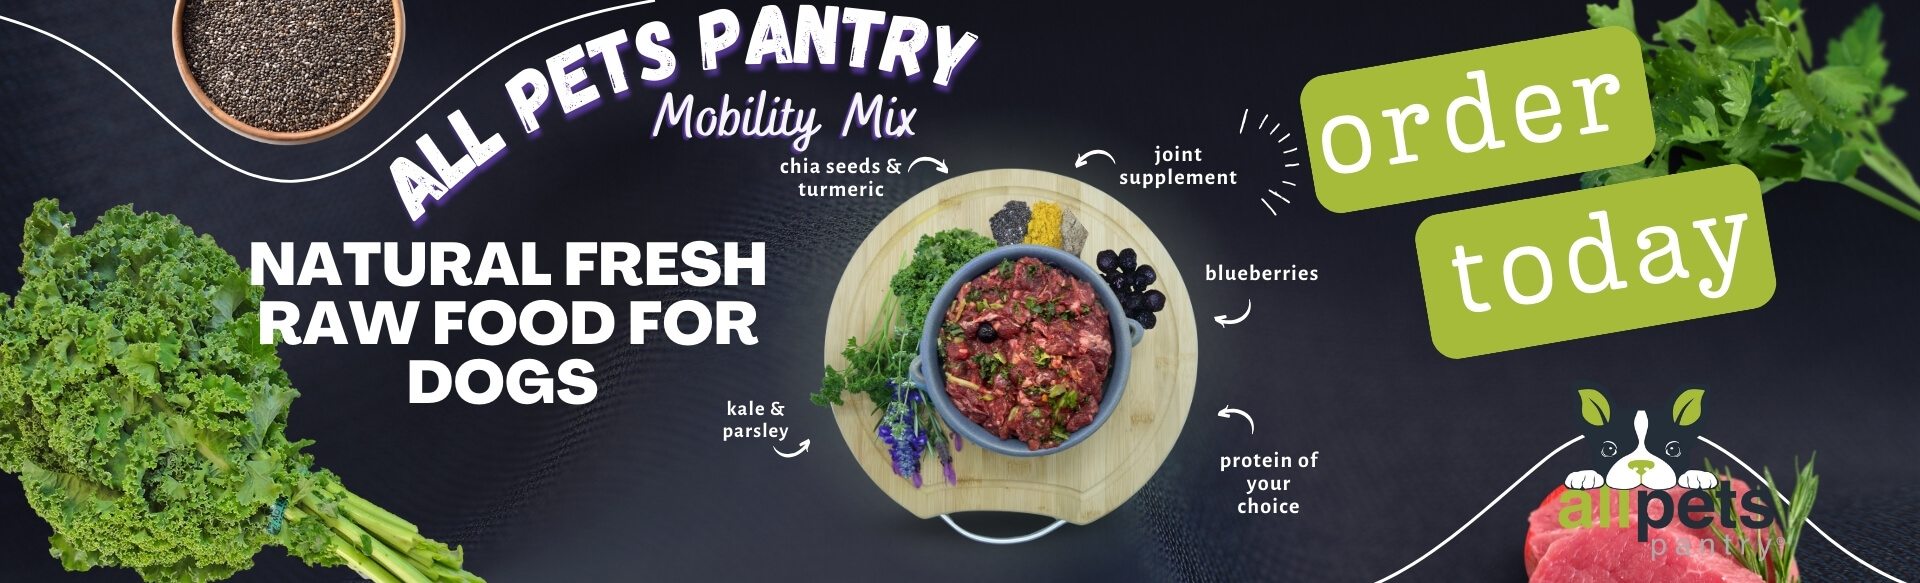 All Pets Pantry Mobility Mix